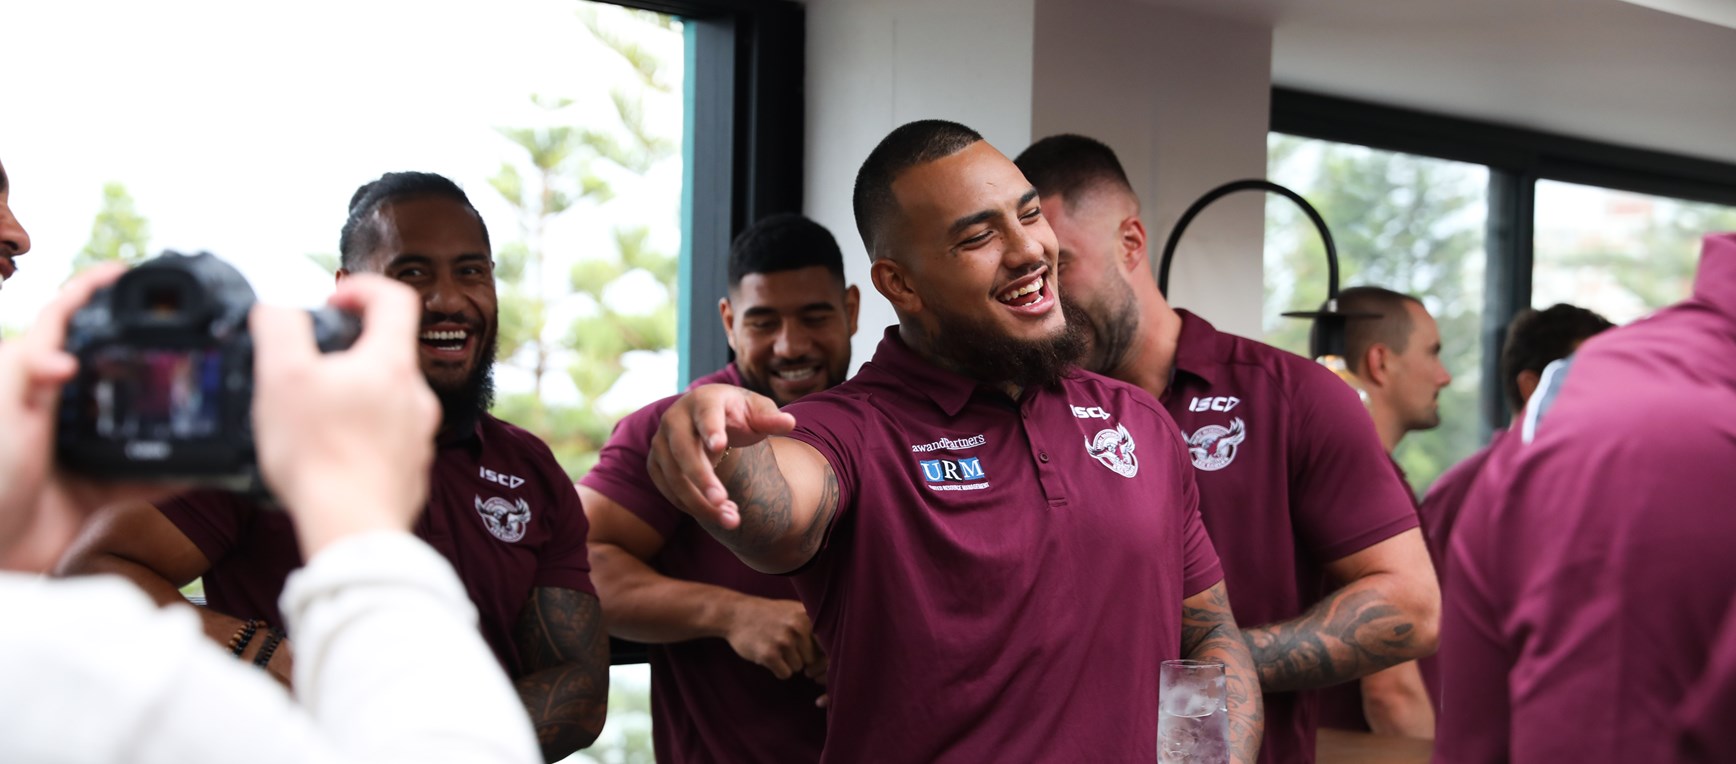 Shaw and Partners pre-season Launch Dinner photo gallery